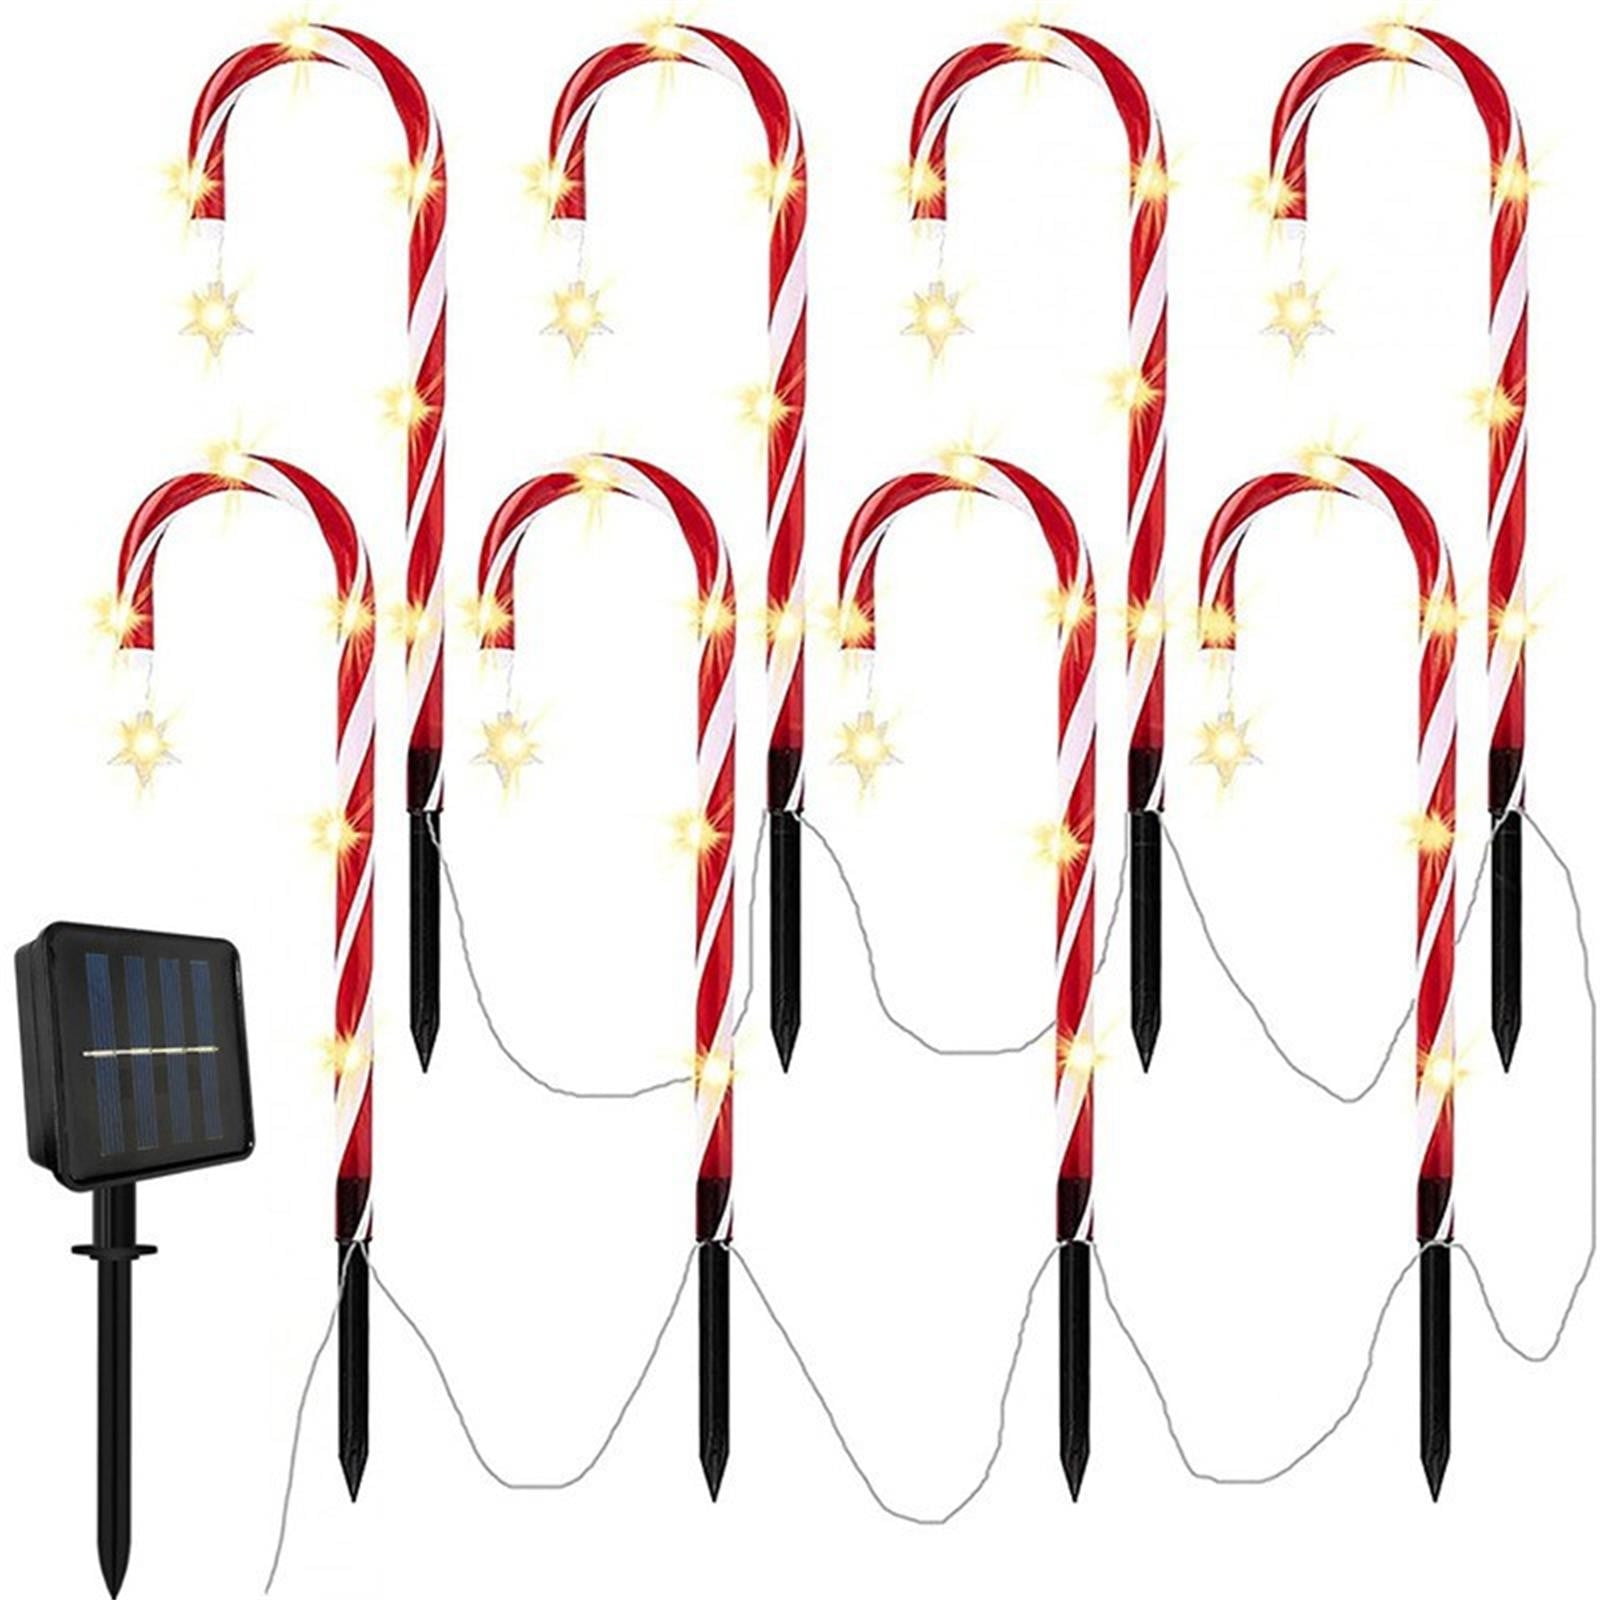 OAVQHLG3B Christmas Candy Cane Pathway Lights,Outdoor Christmas ...